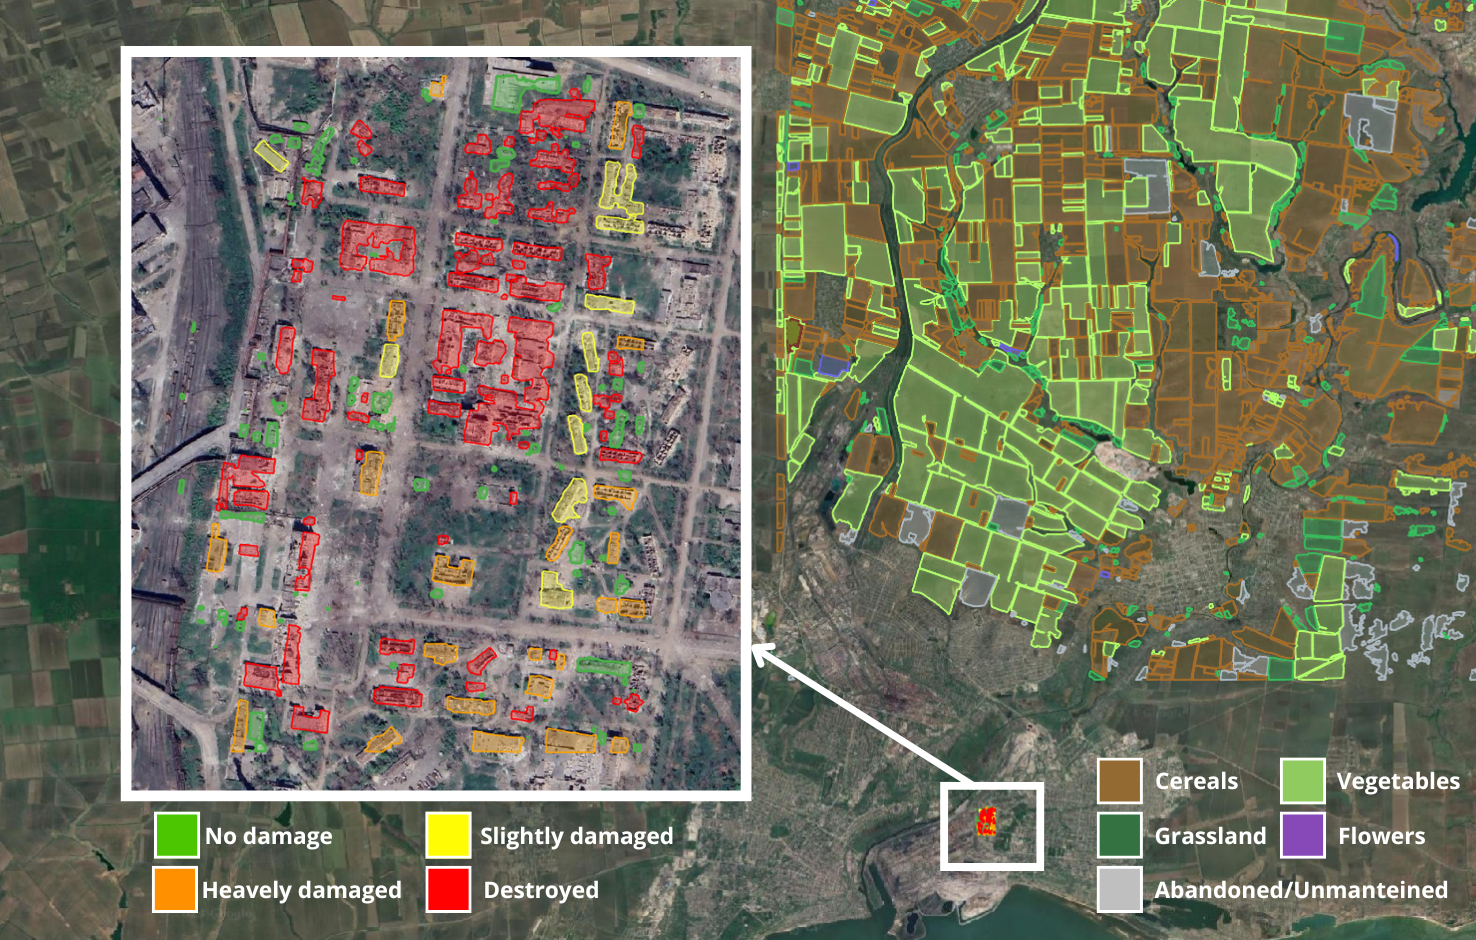 Mariupol (Ukraine), 2022. Damage assessment mapping using AIDA: buildings and crop affected by the conflict. Image credit: Ithaca Srl